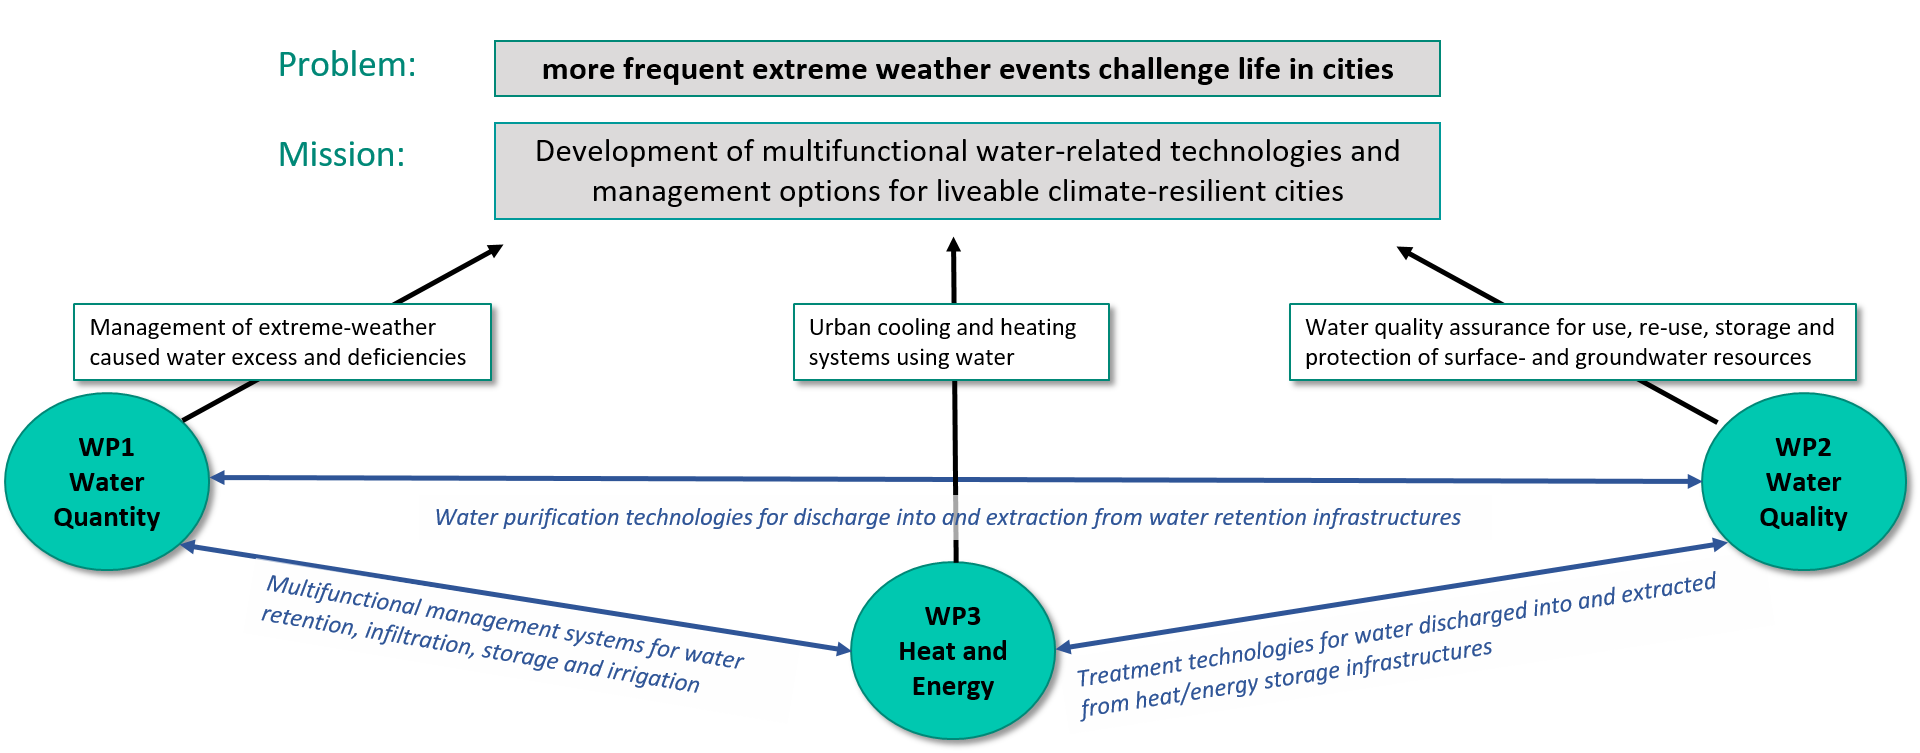 CityTech mission: Development of multifunctional water-related technologies and management options for liveable climate-resilient cities